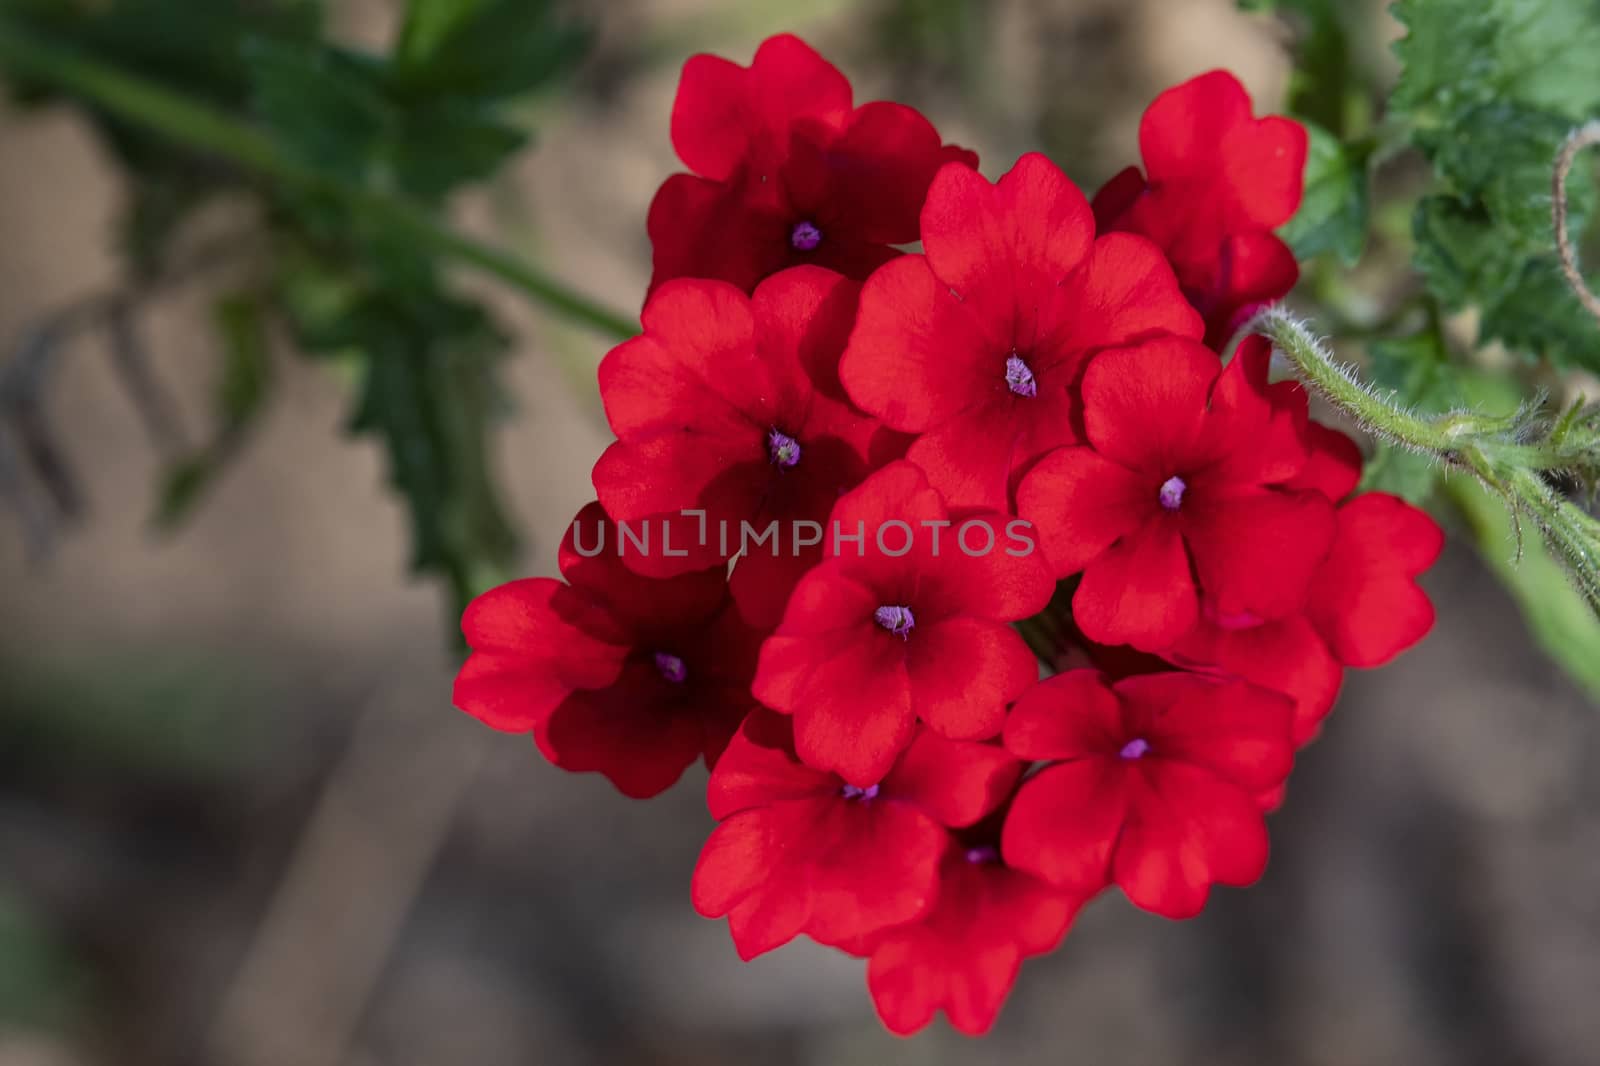 Cluster of bright red verbena flowers with purple centers.